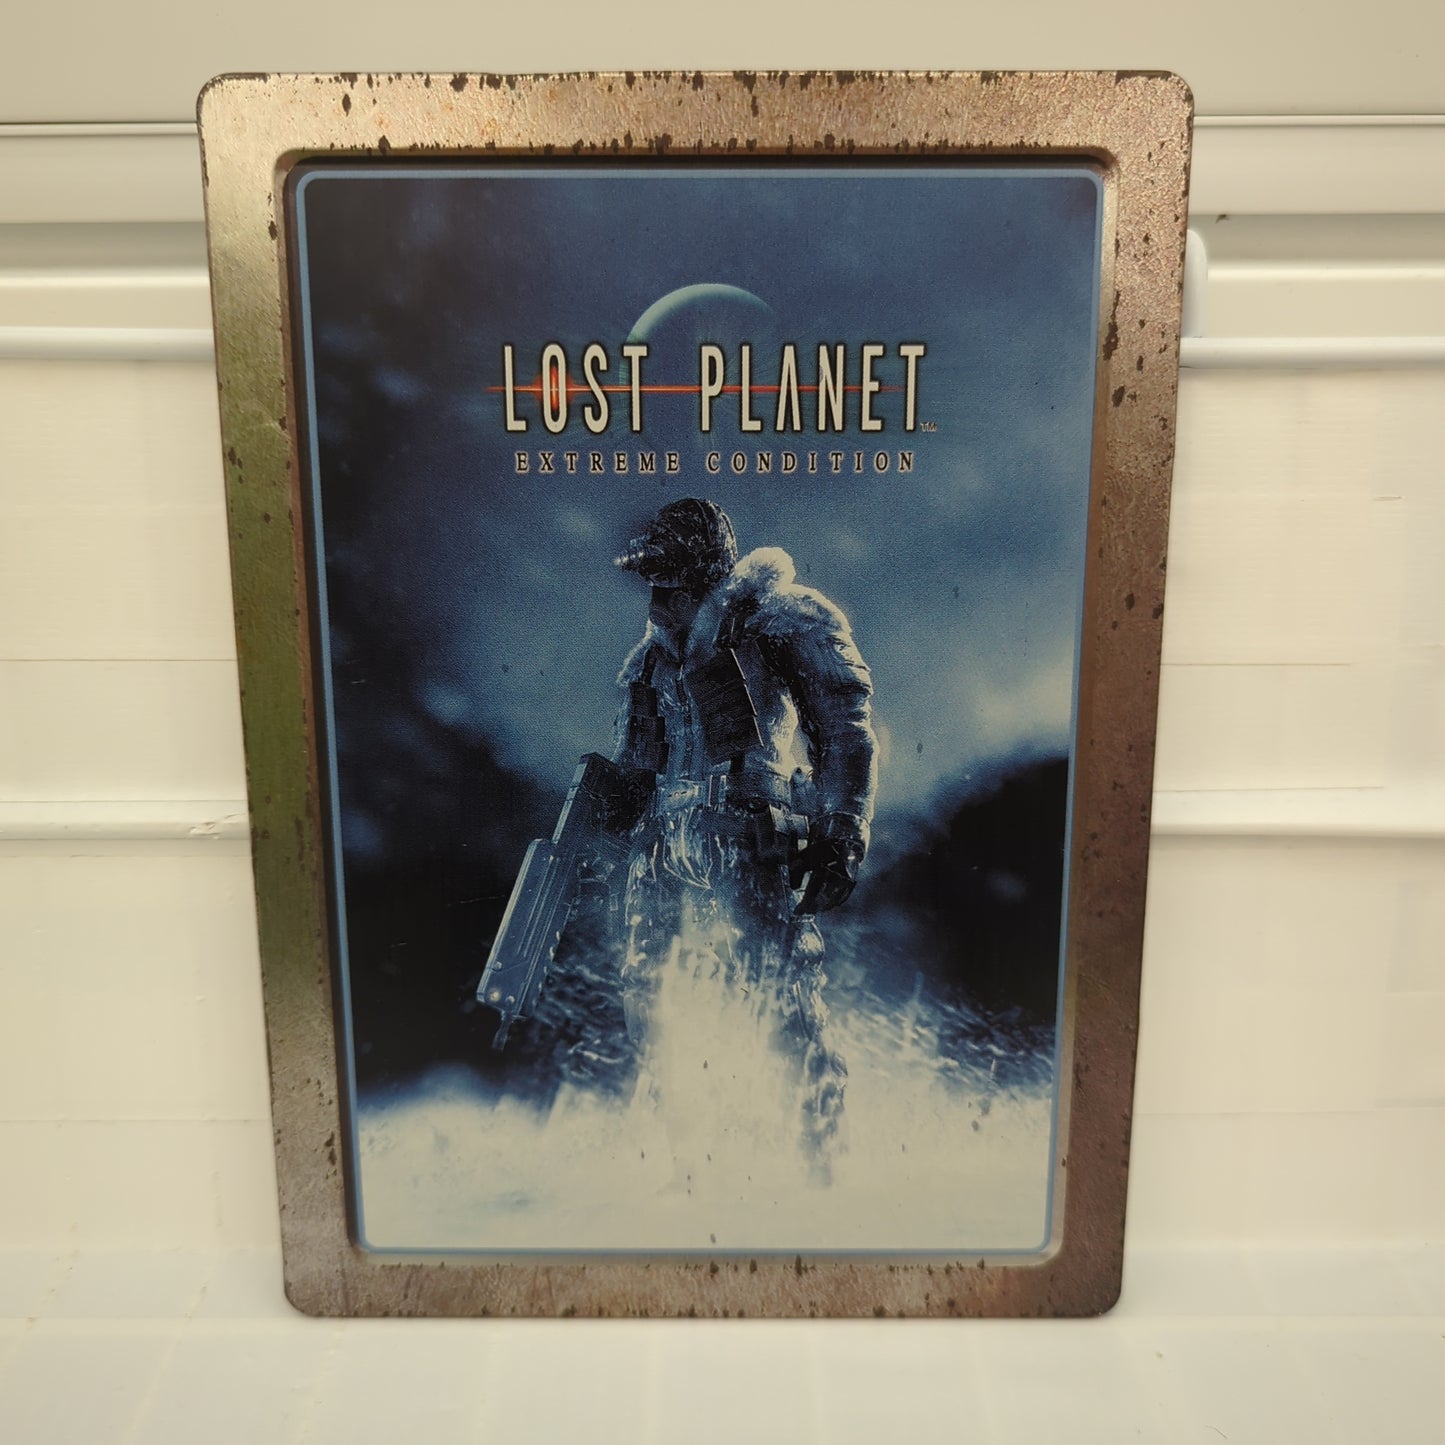 Lost Planet Extreme Condition [Steelbook] - Xbox 360